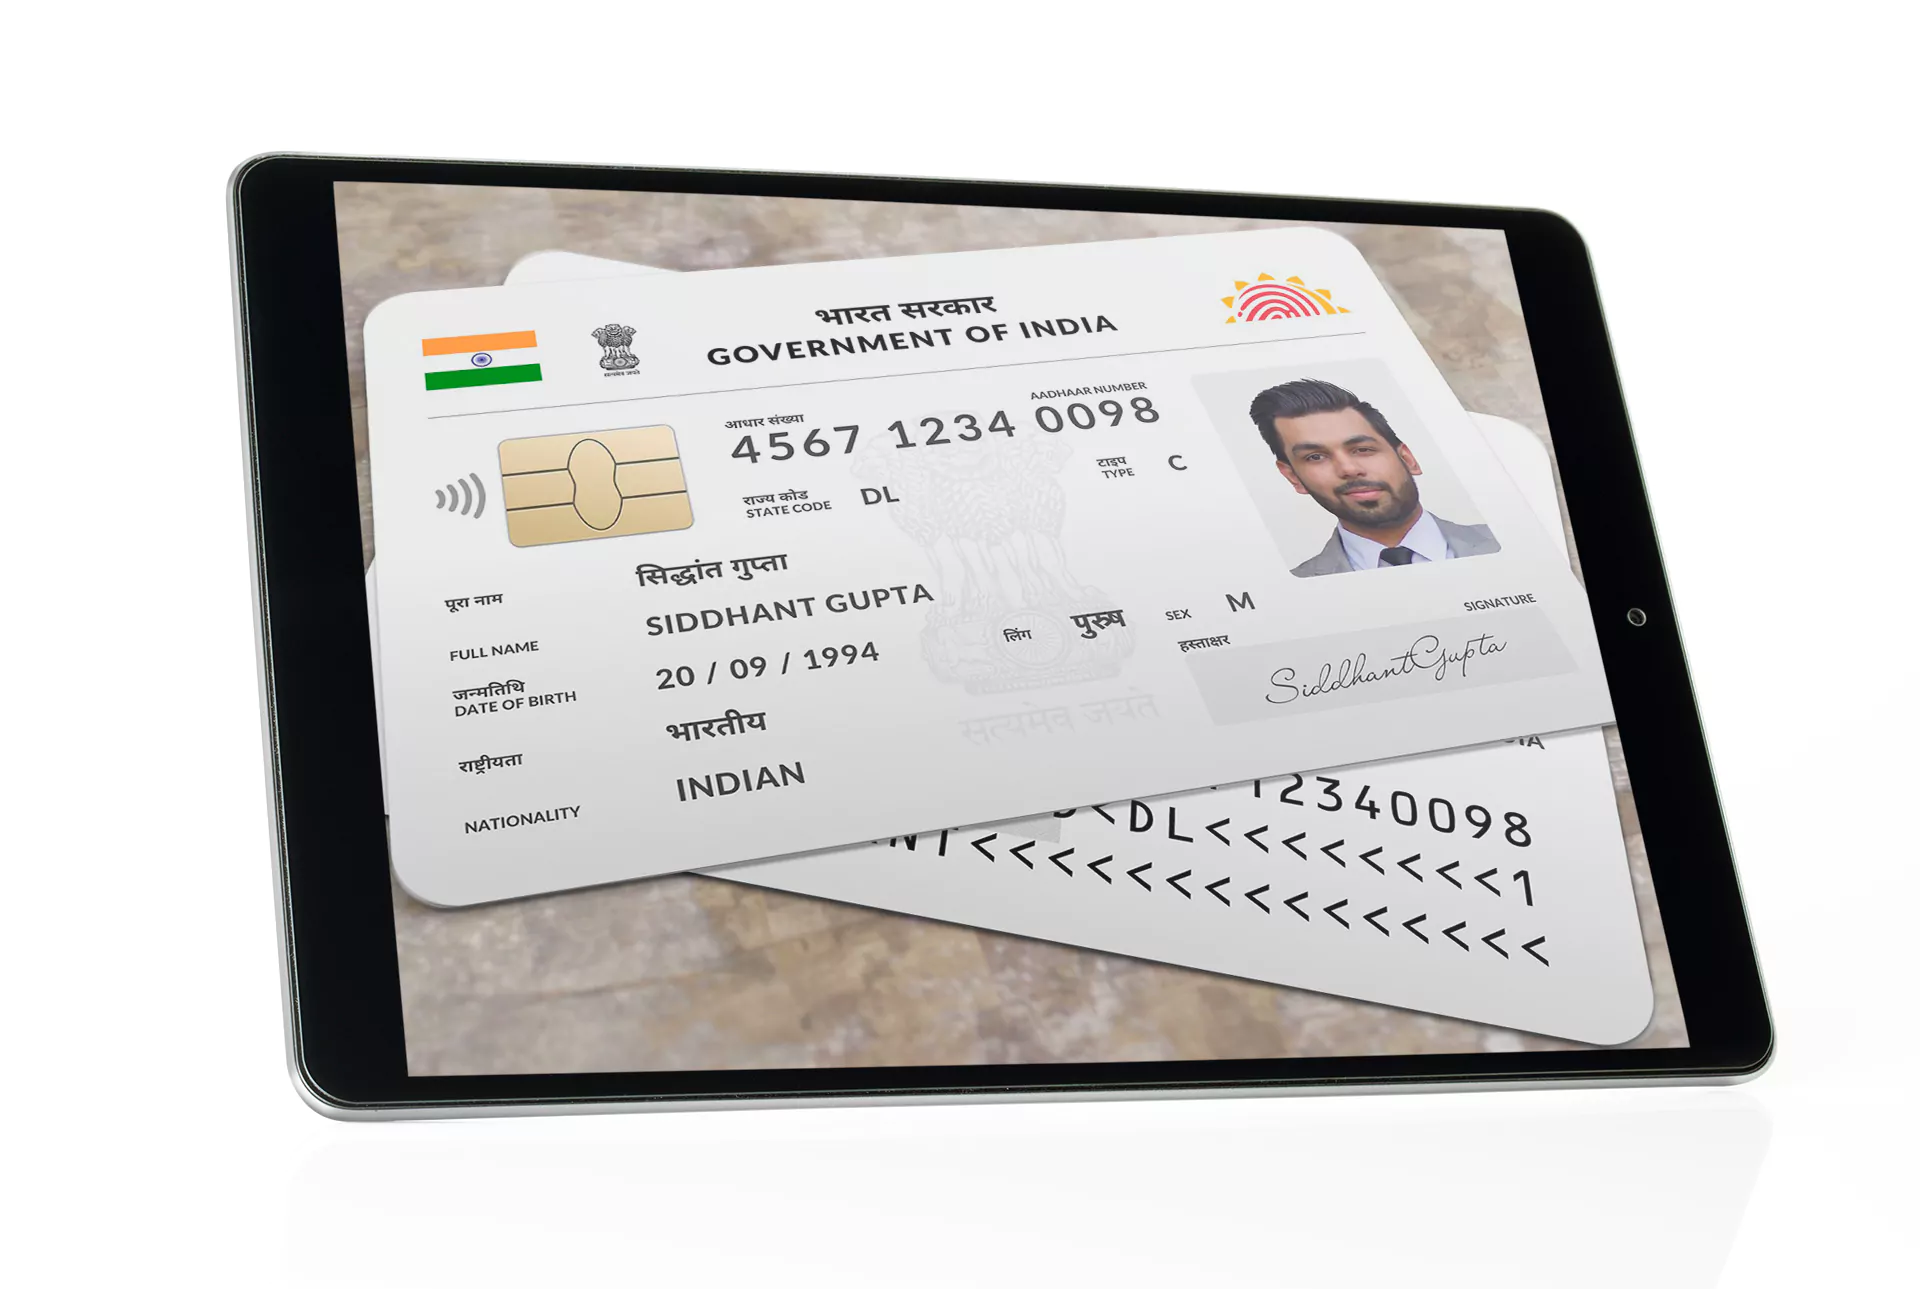 Prove your identity with your IC card or driving license.